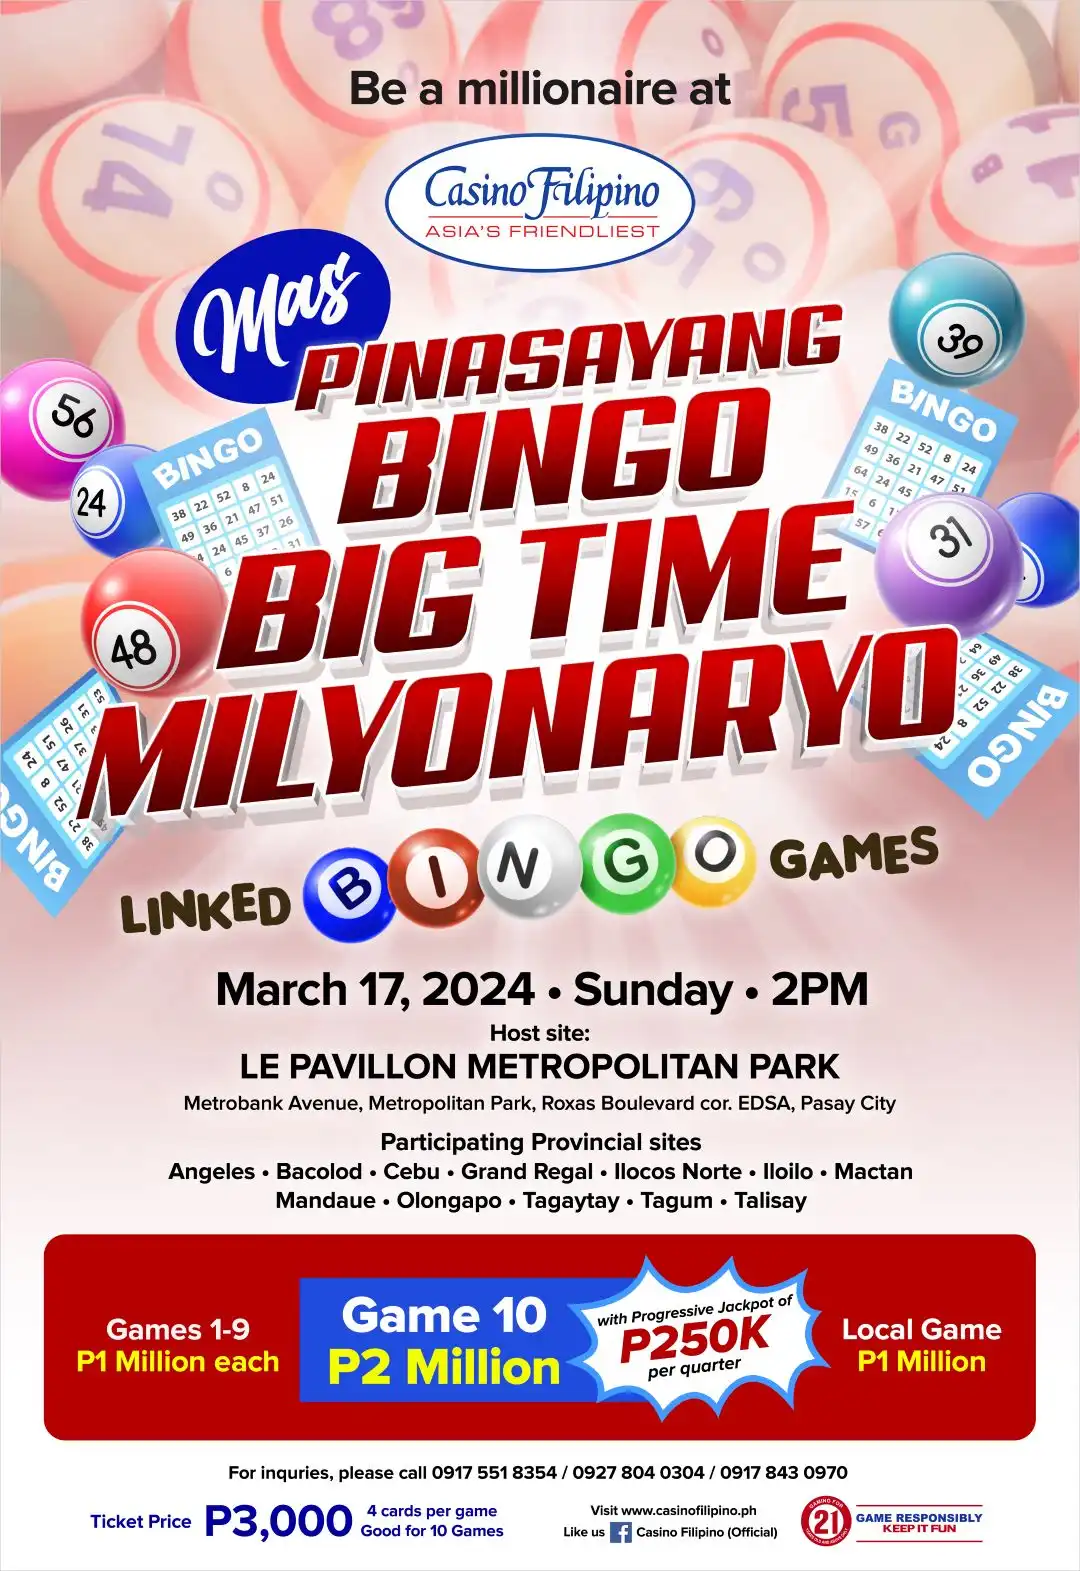 Bigger prizes up for grabs in upcoming PAGCOR linked bingo games